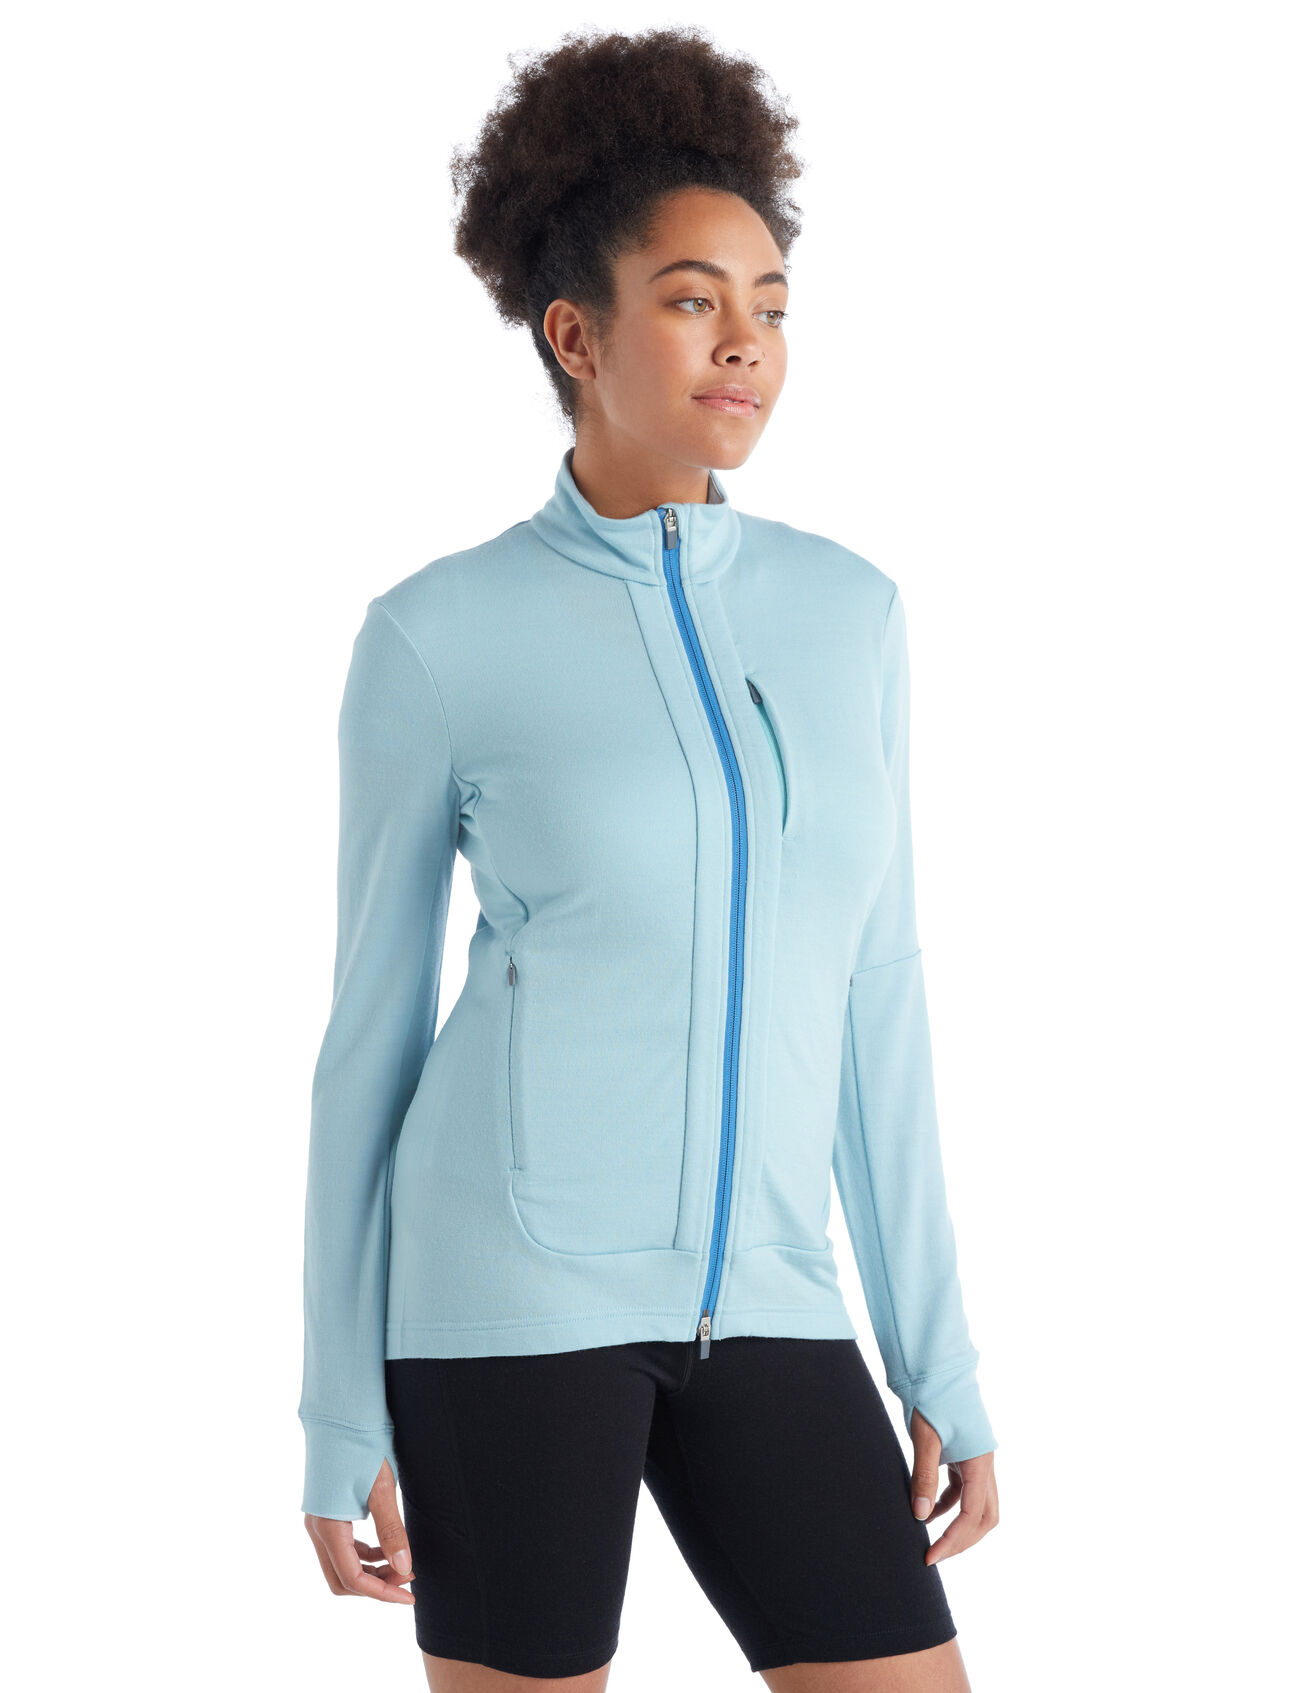 Womens Merino Quantum III Long Sleeve Zip Jacket A 100% merino wool mid layer ideal for technical mountain adventures, the Quantum III Long Sleeve Zip helps regulate your body temperature when you're on the move.